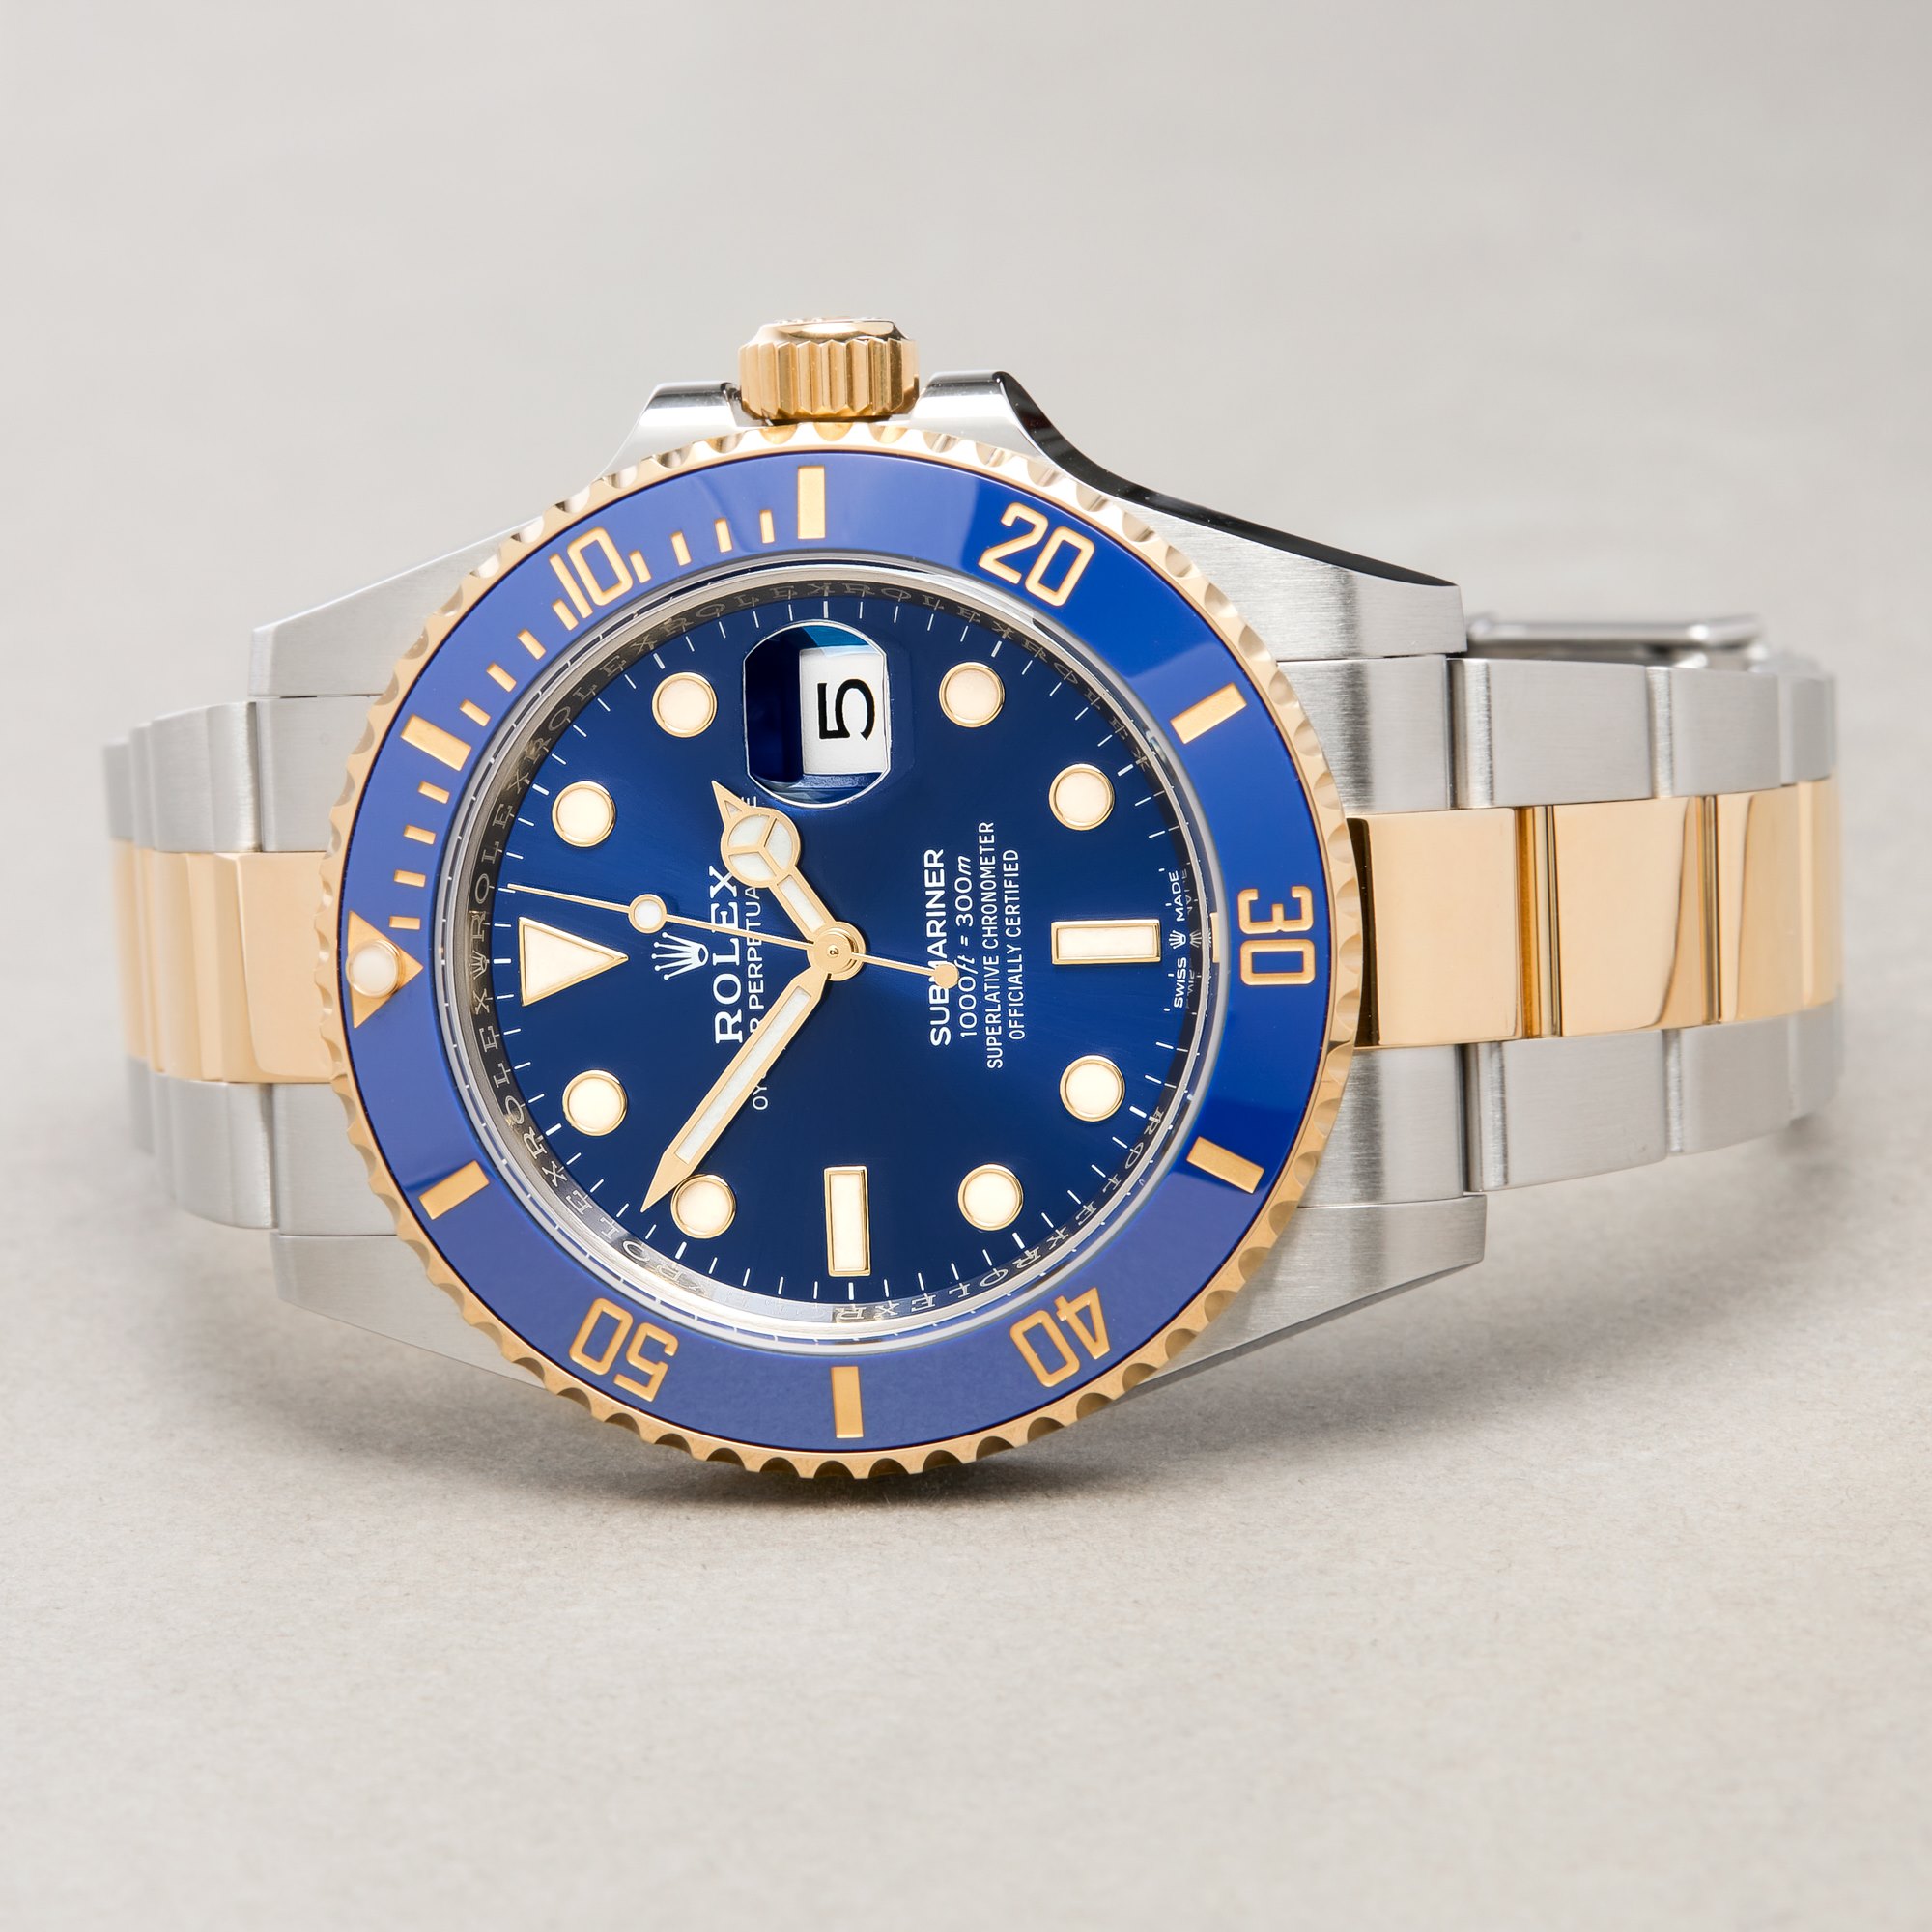 Rolex Submariner Date Yellow Gold & Stainless Steel 126613LB